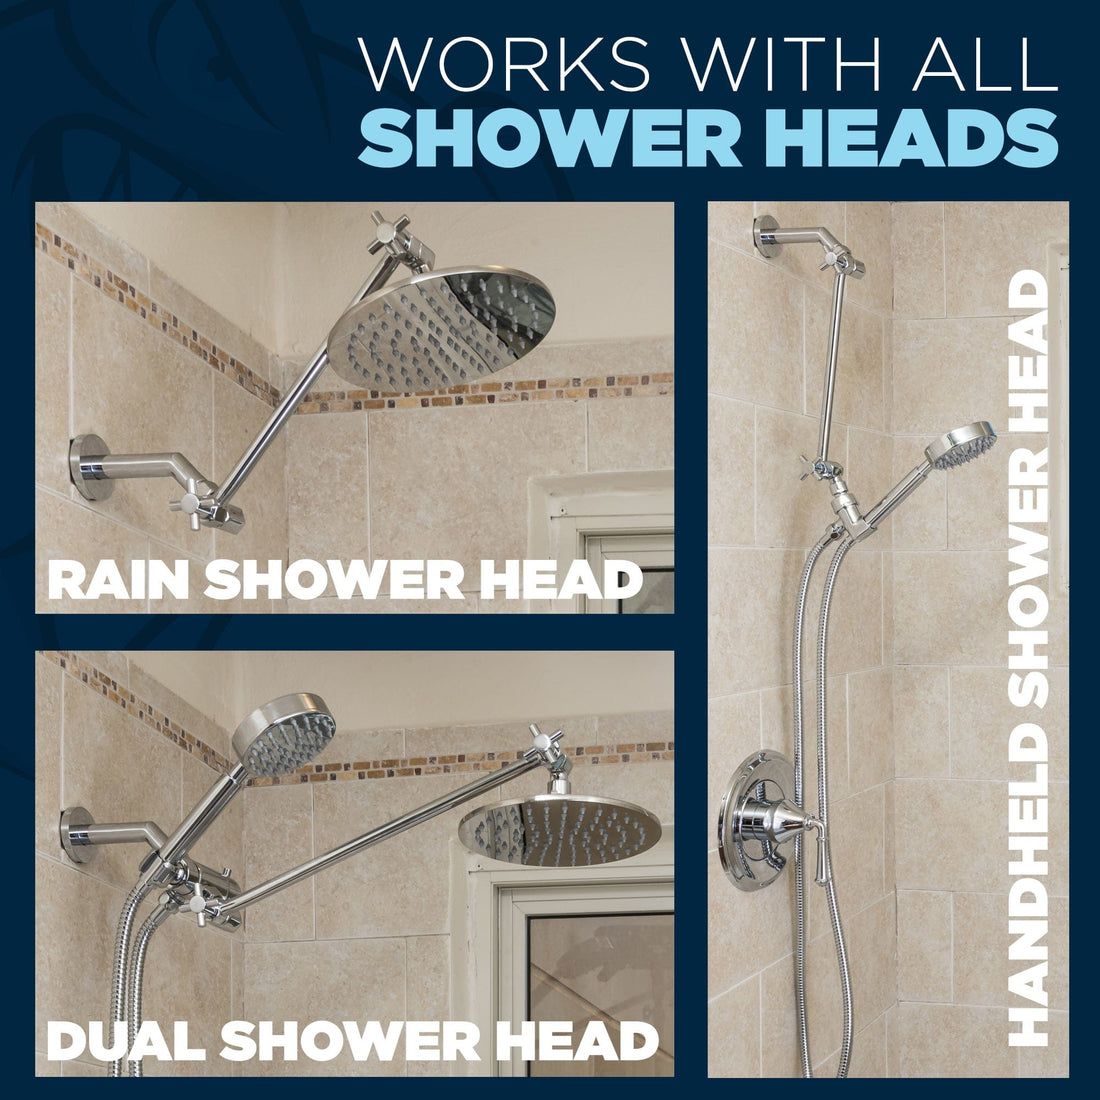 (Works with All Shower Heads) 16 Inch Extra Long Adjustable Shower Arm Extension Pipe Raise or Lower Shower Head Height Easy Installation 16 Inch / Chrome - The Shower Head Store